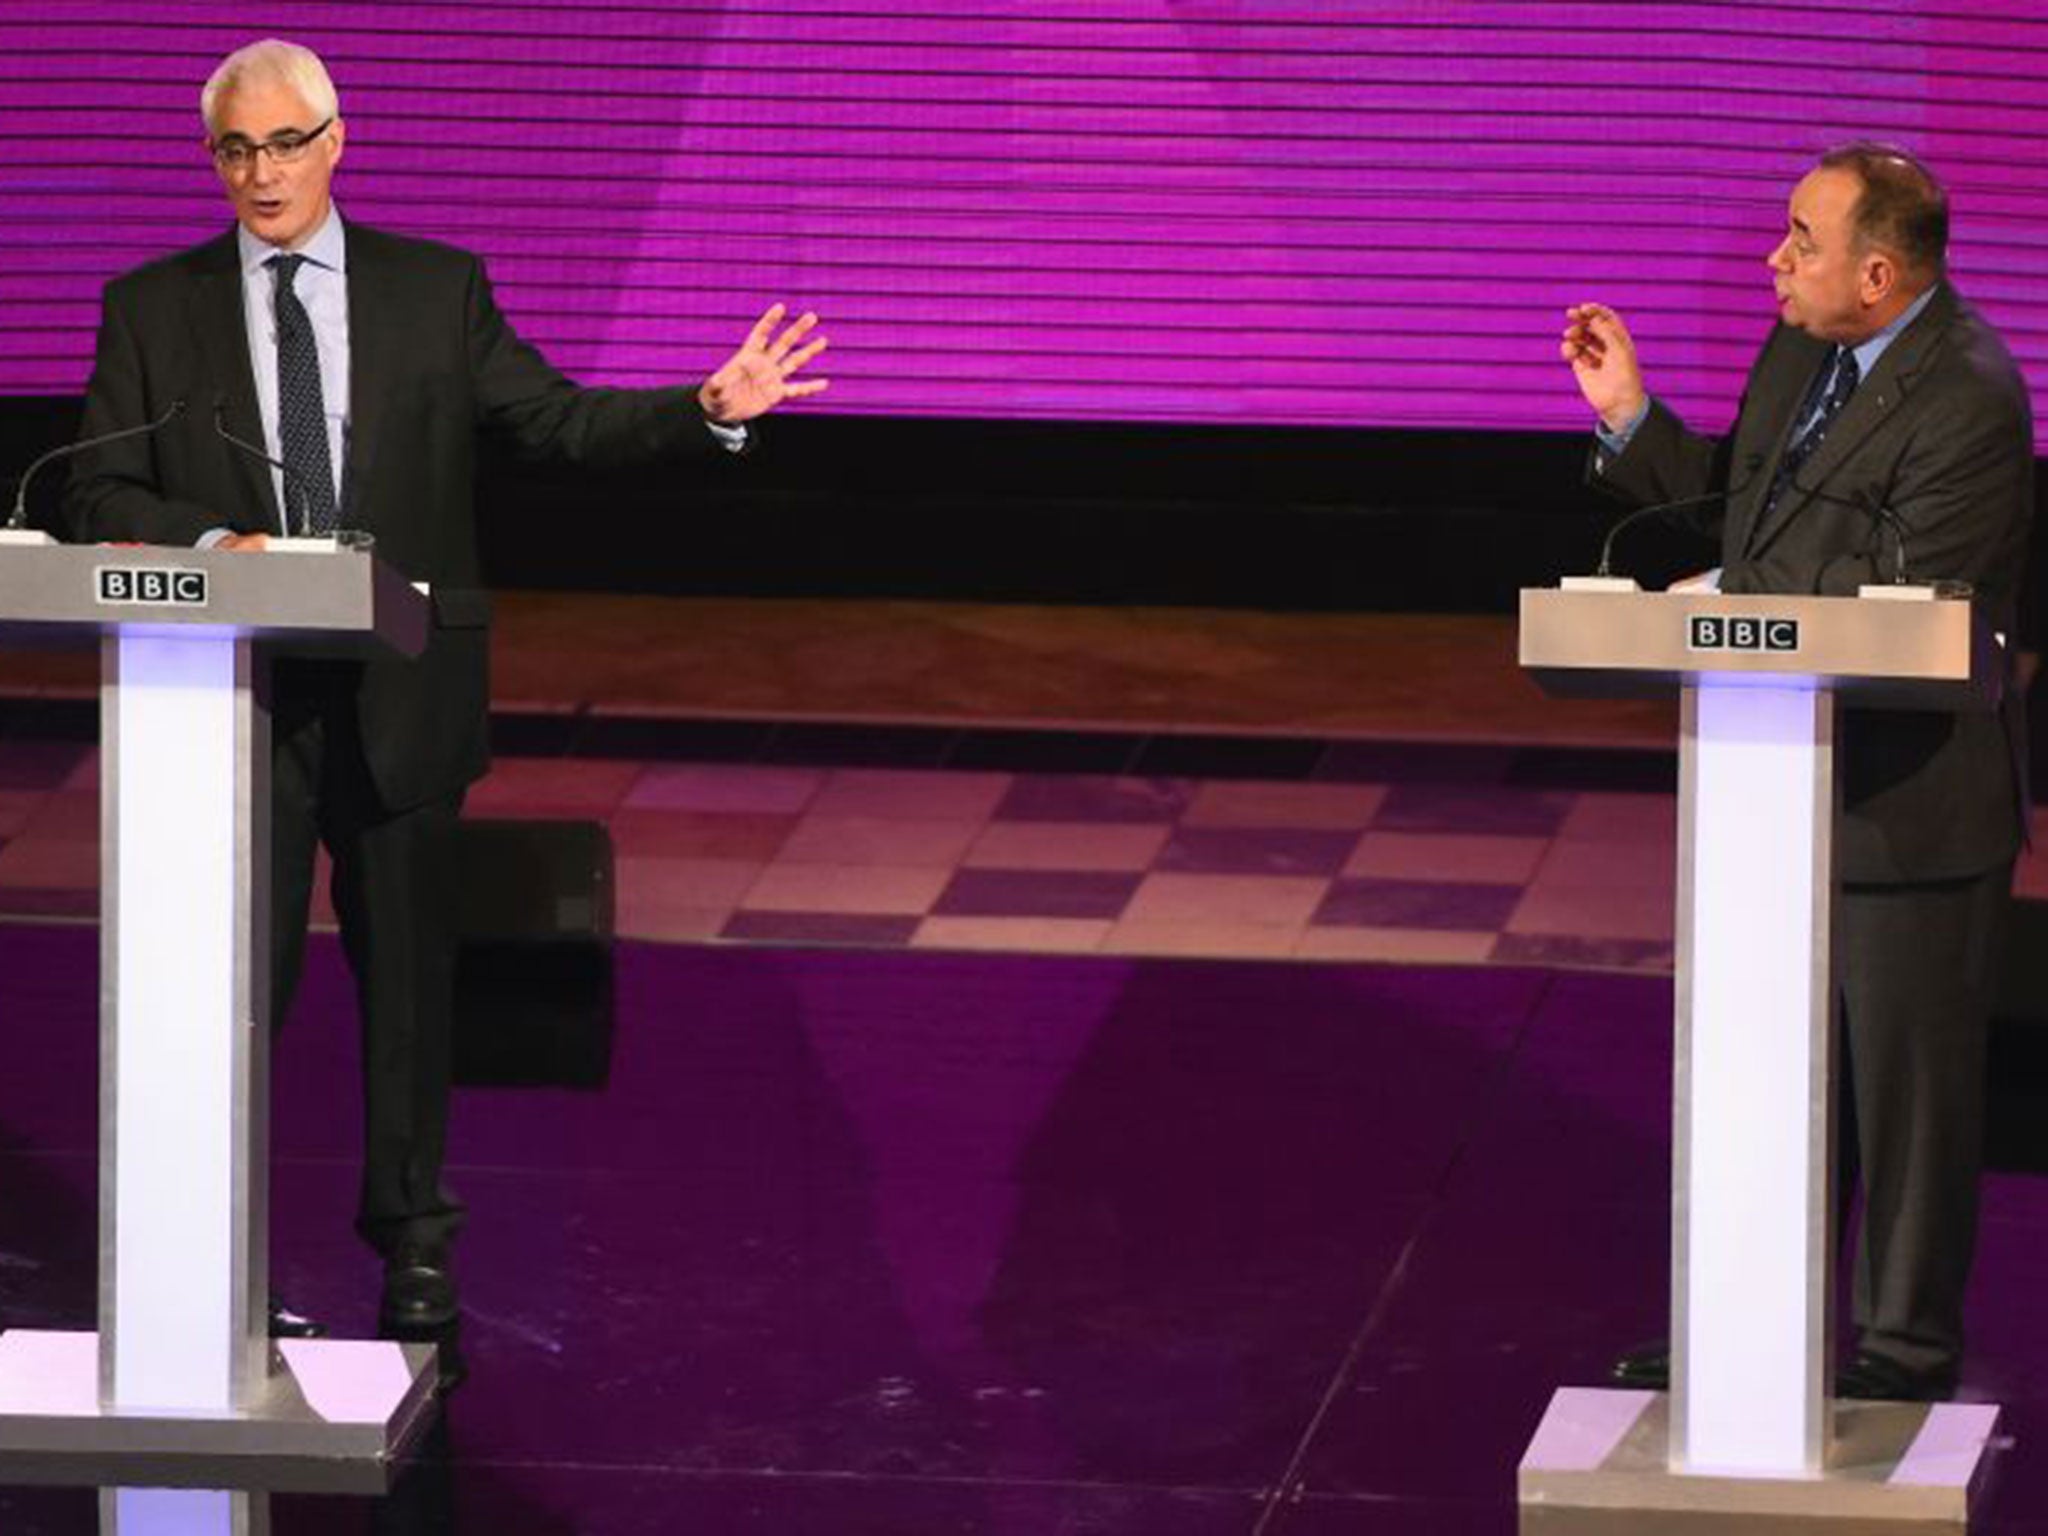 The two politicians went head to head for the second time, answering questions from members of the audience on key issues